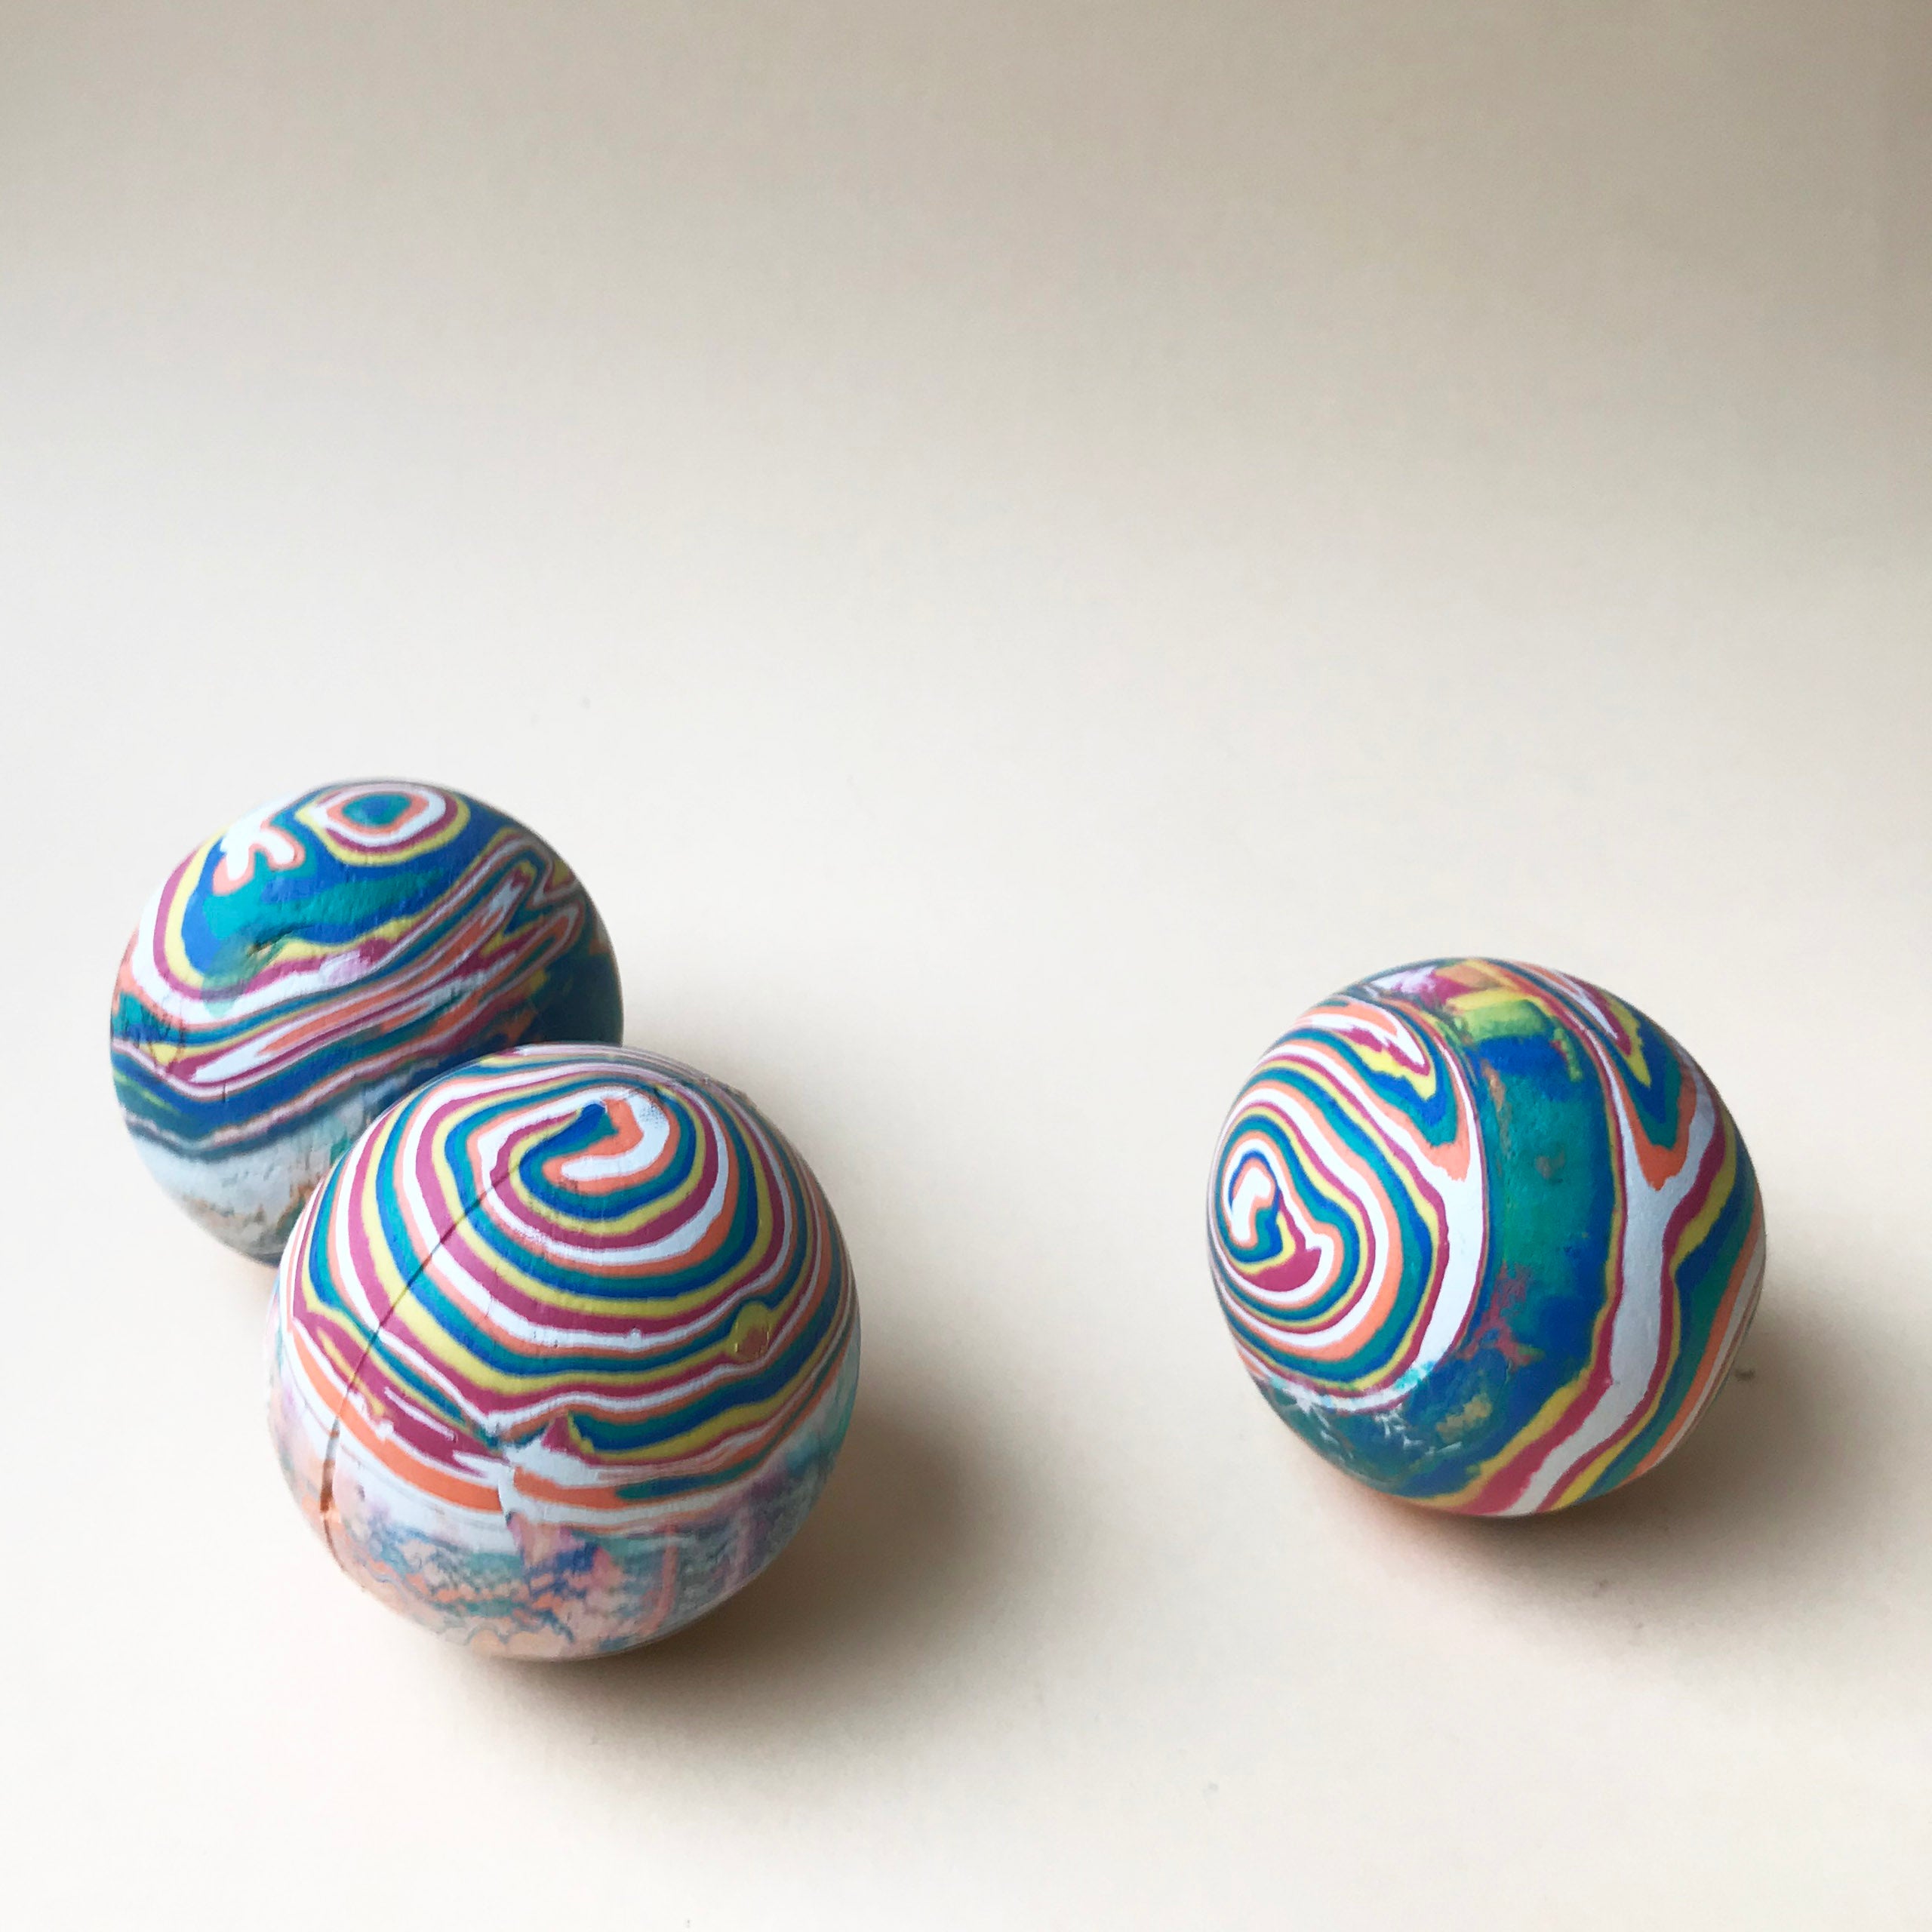 Rubber bouncing ball marbled